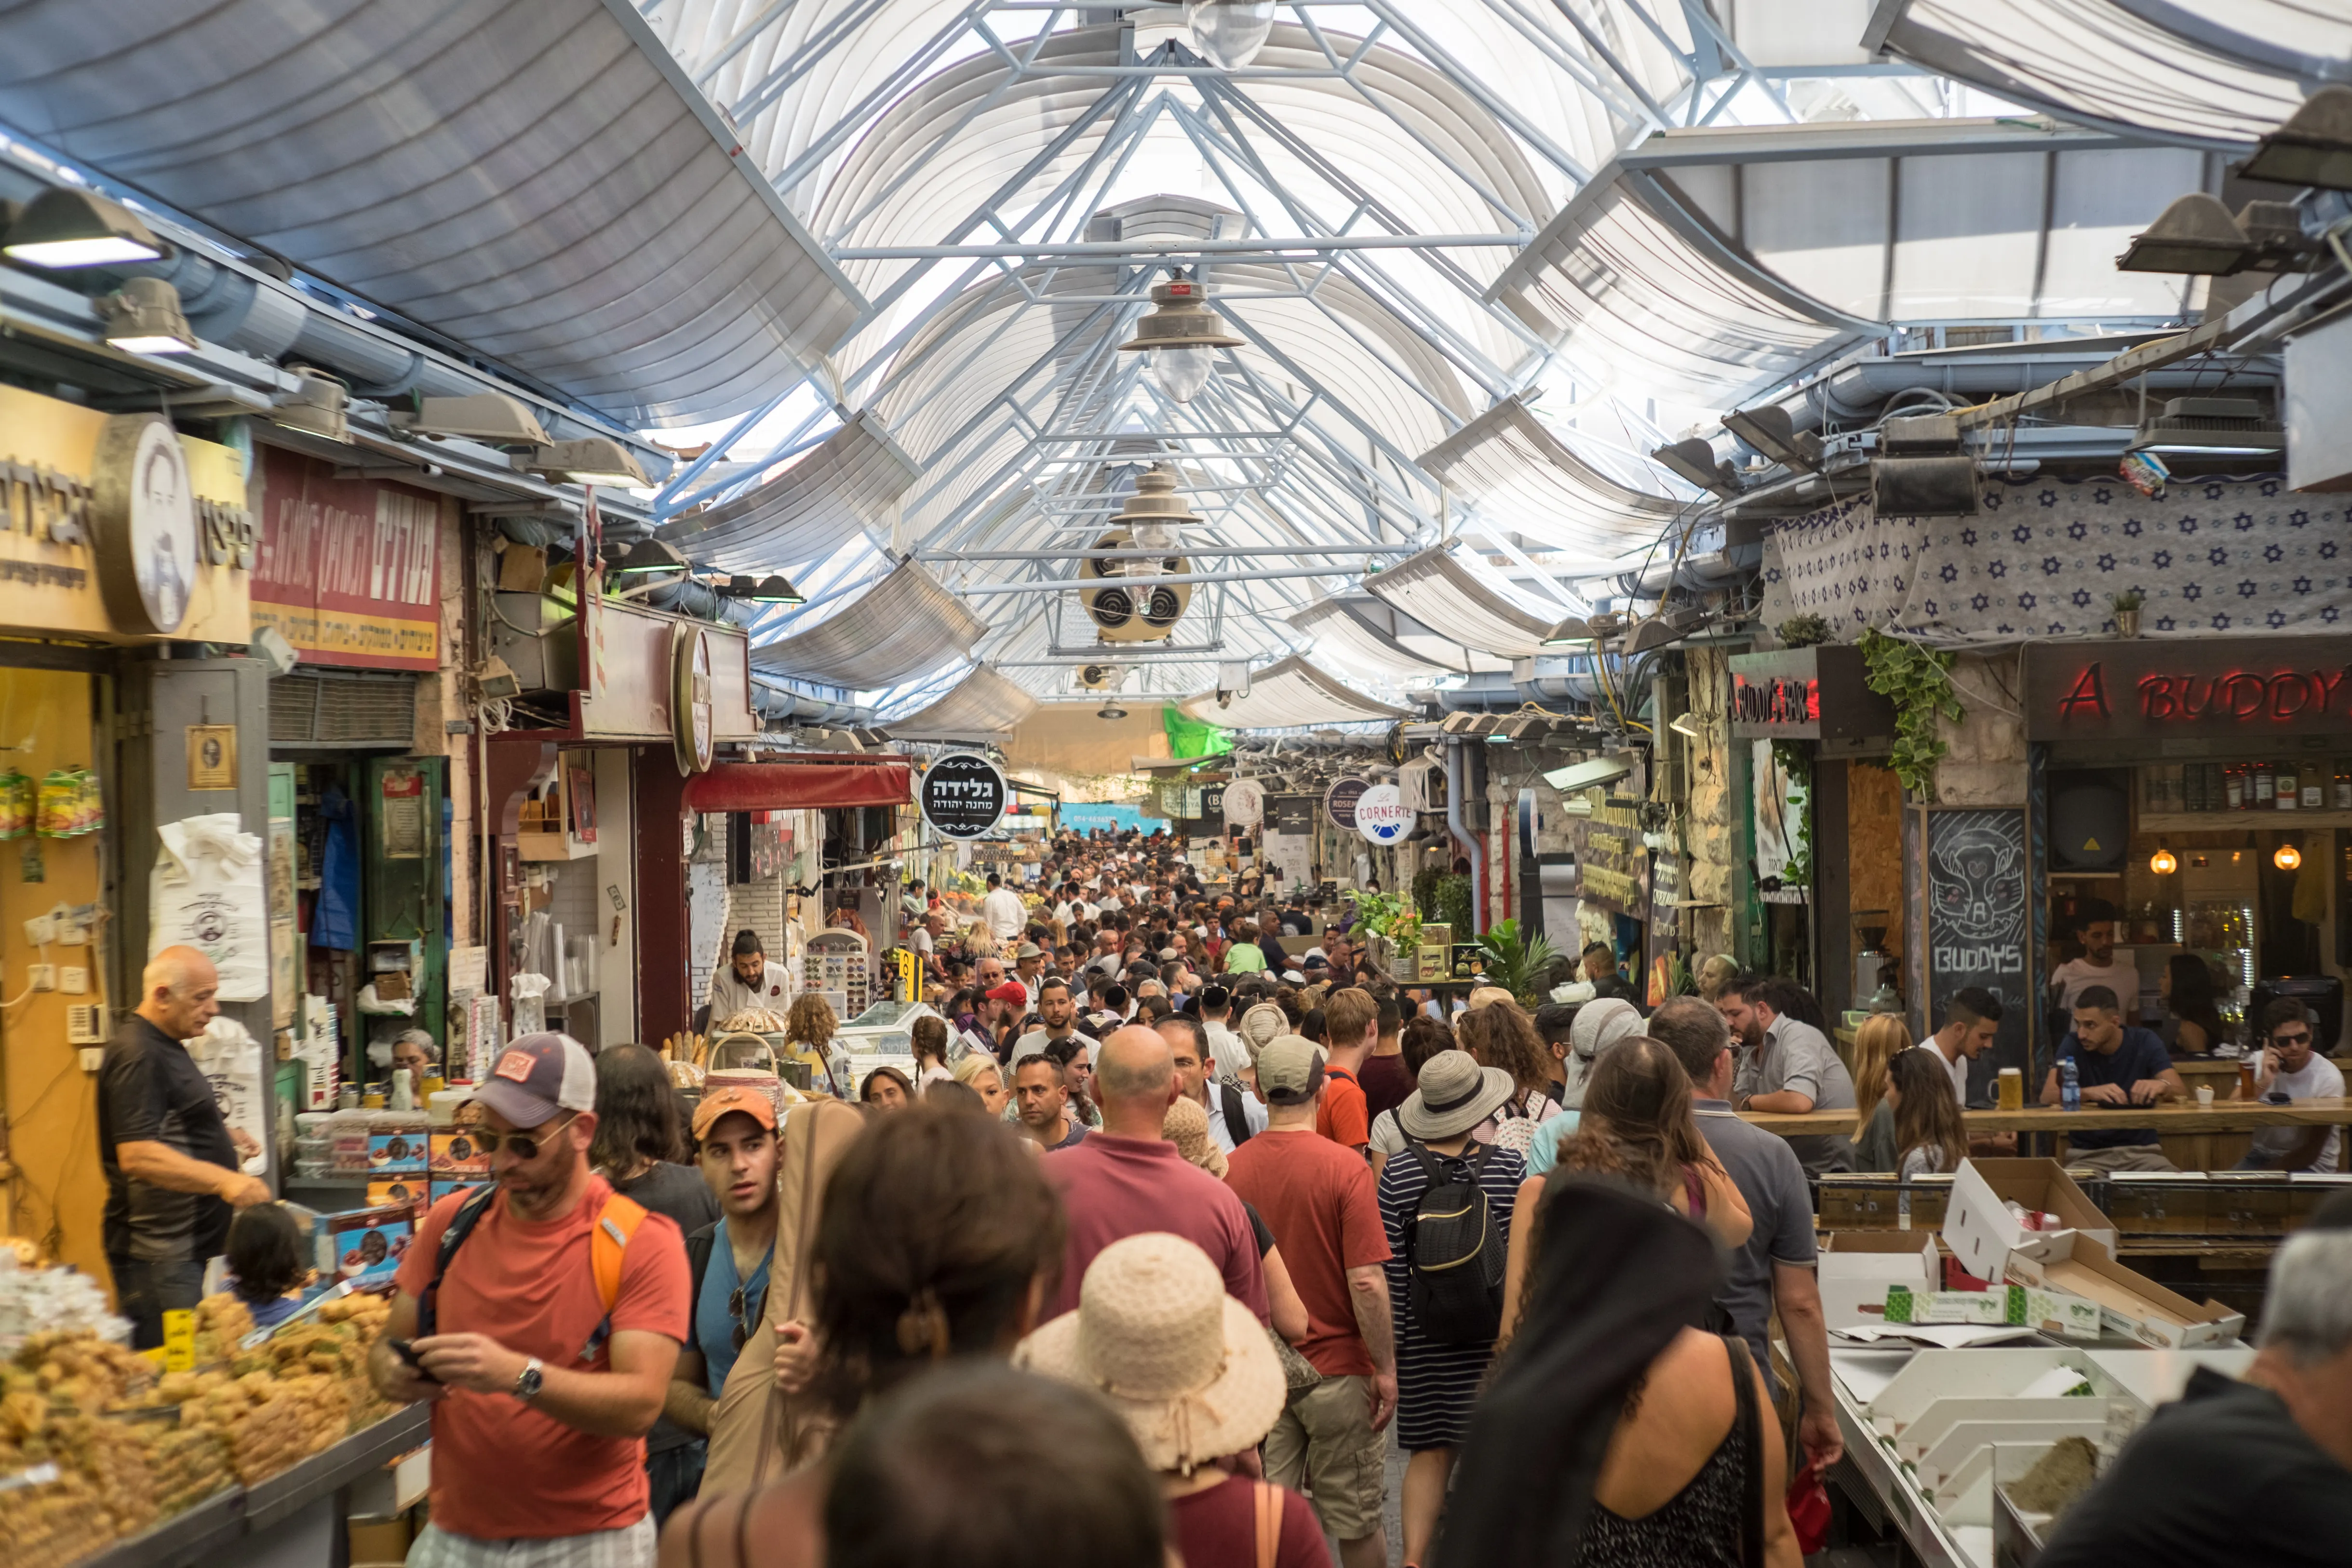 Mahane Yehuda Market in Israel, middle_east | Spices,Organic Food,Groceries,Baked Goods,Sweets,Fruit & Vegetable,Herbs,Meat - Rated 4.6